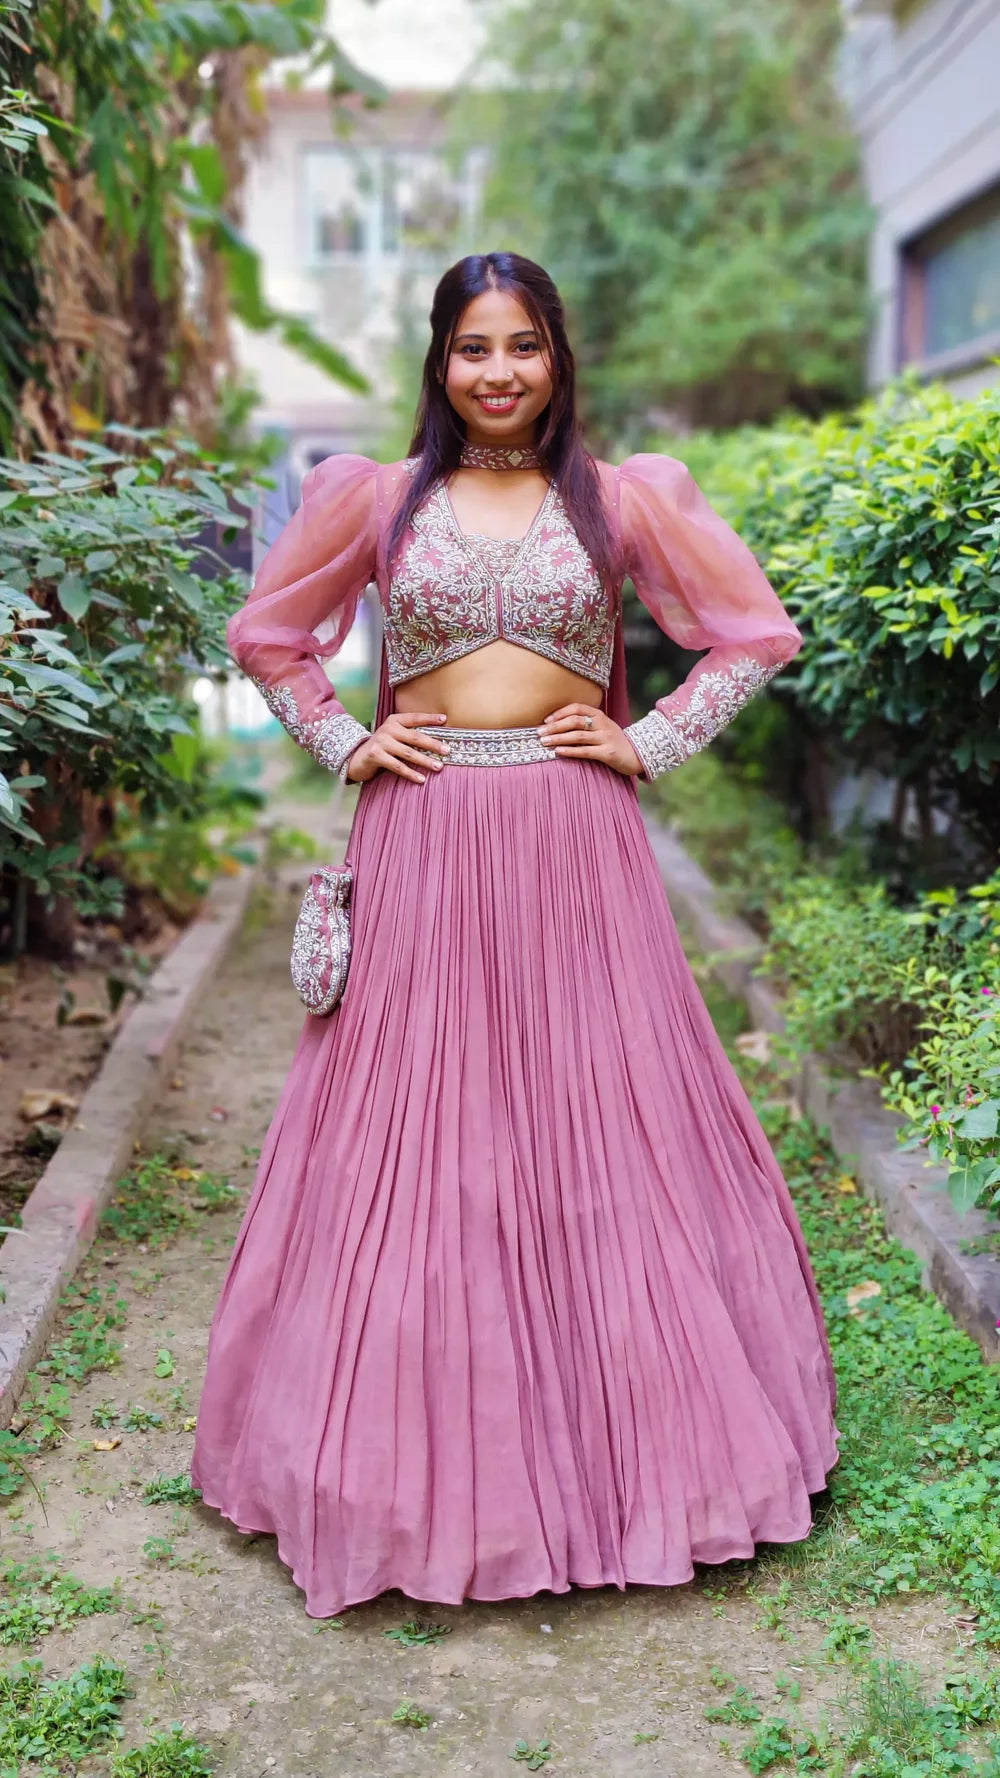 Buy Vintage Rose Pink Sequins Lehenga With A Balloon Sleeves Crop Top  Featuring Embroidered Lapel Collar Neckline Online - Kalki Fashion